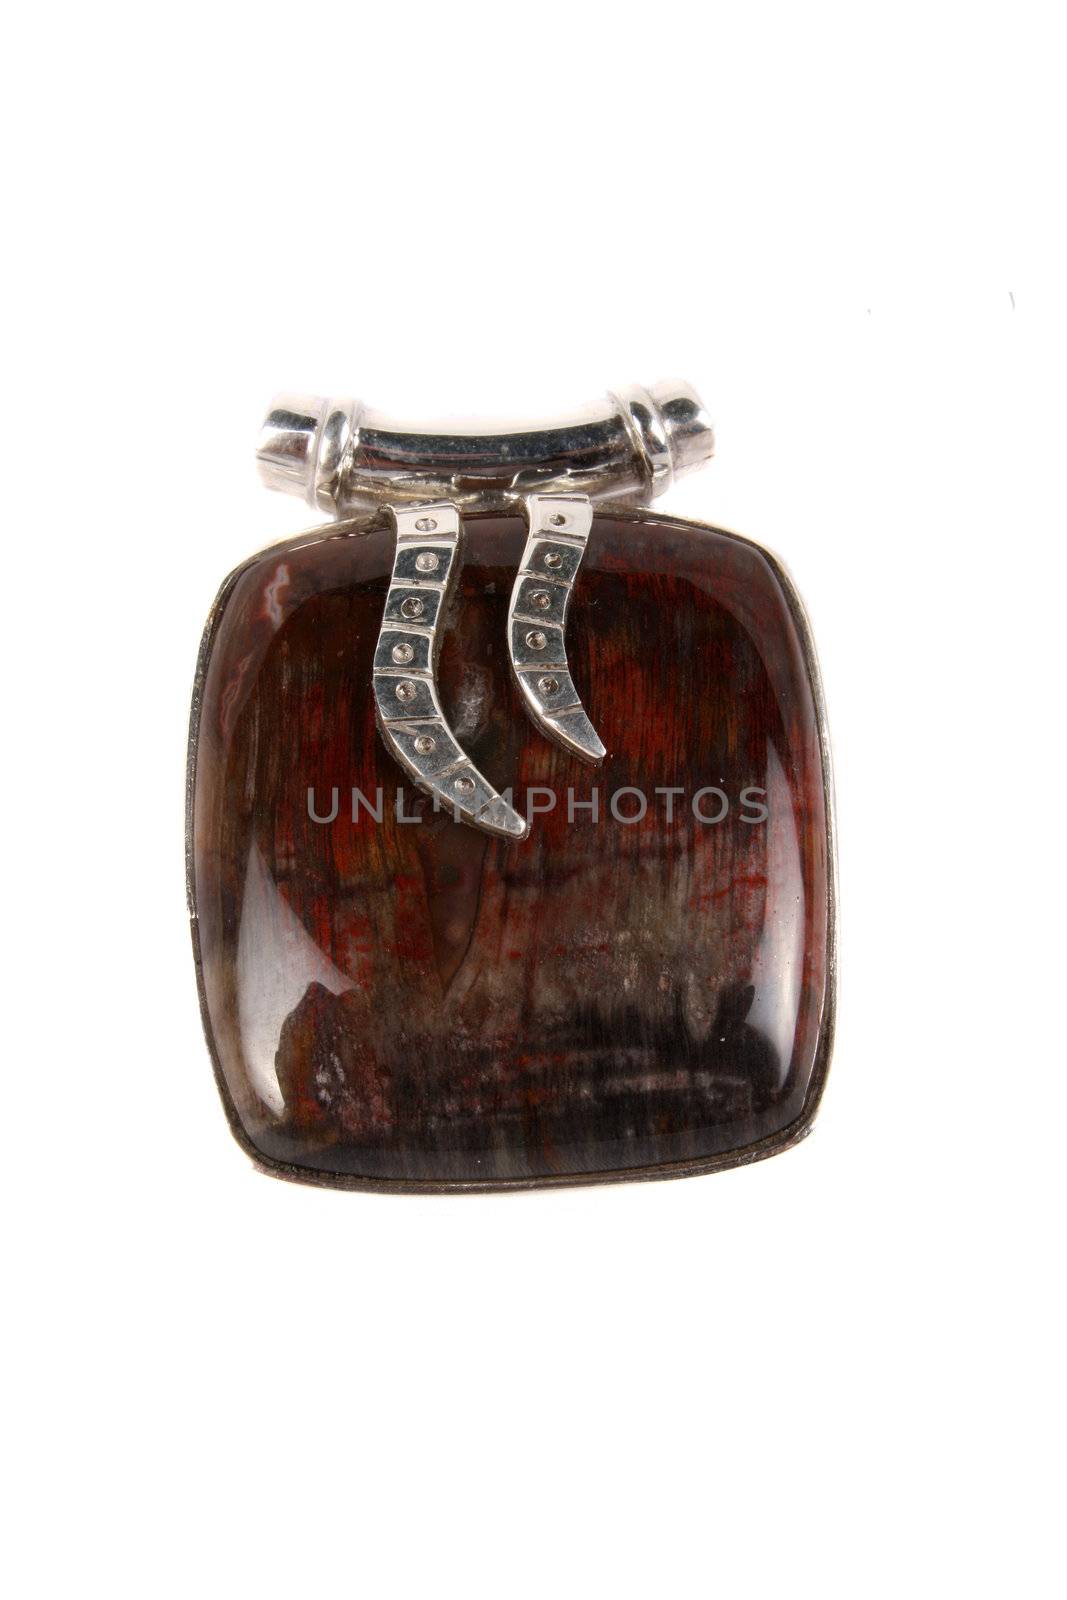 A Jasper pendant made of silver used as jewelery or alternate therapy method in crystal healing on astrology, isolated on white studio background.